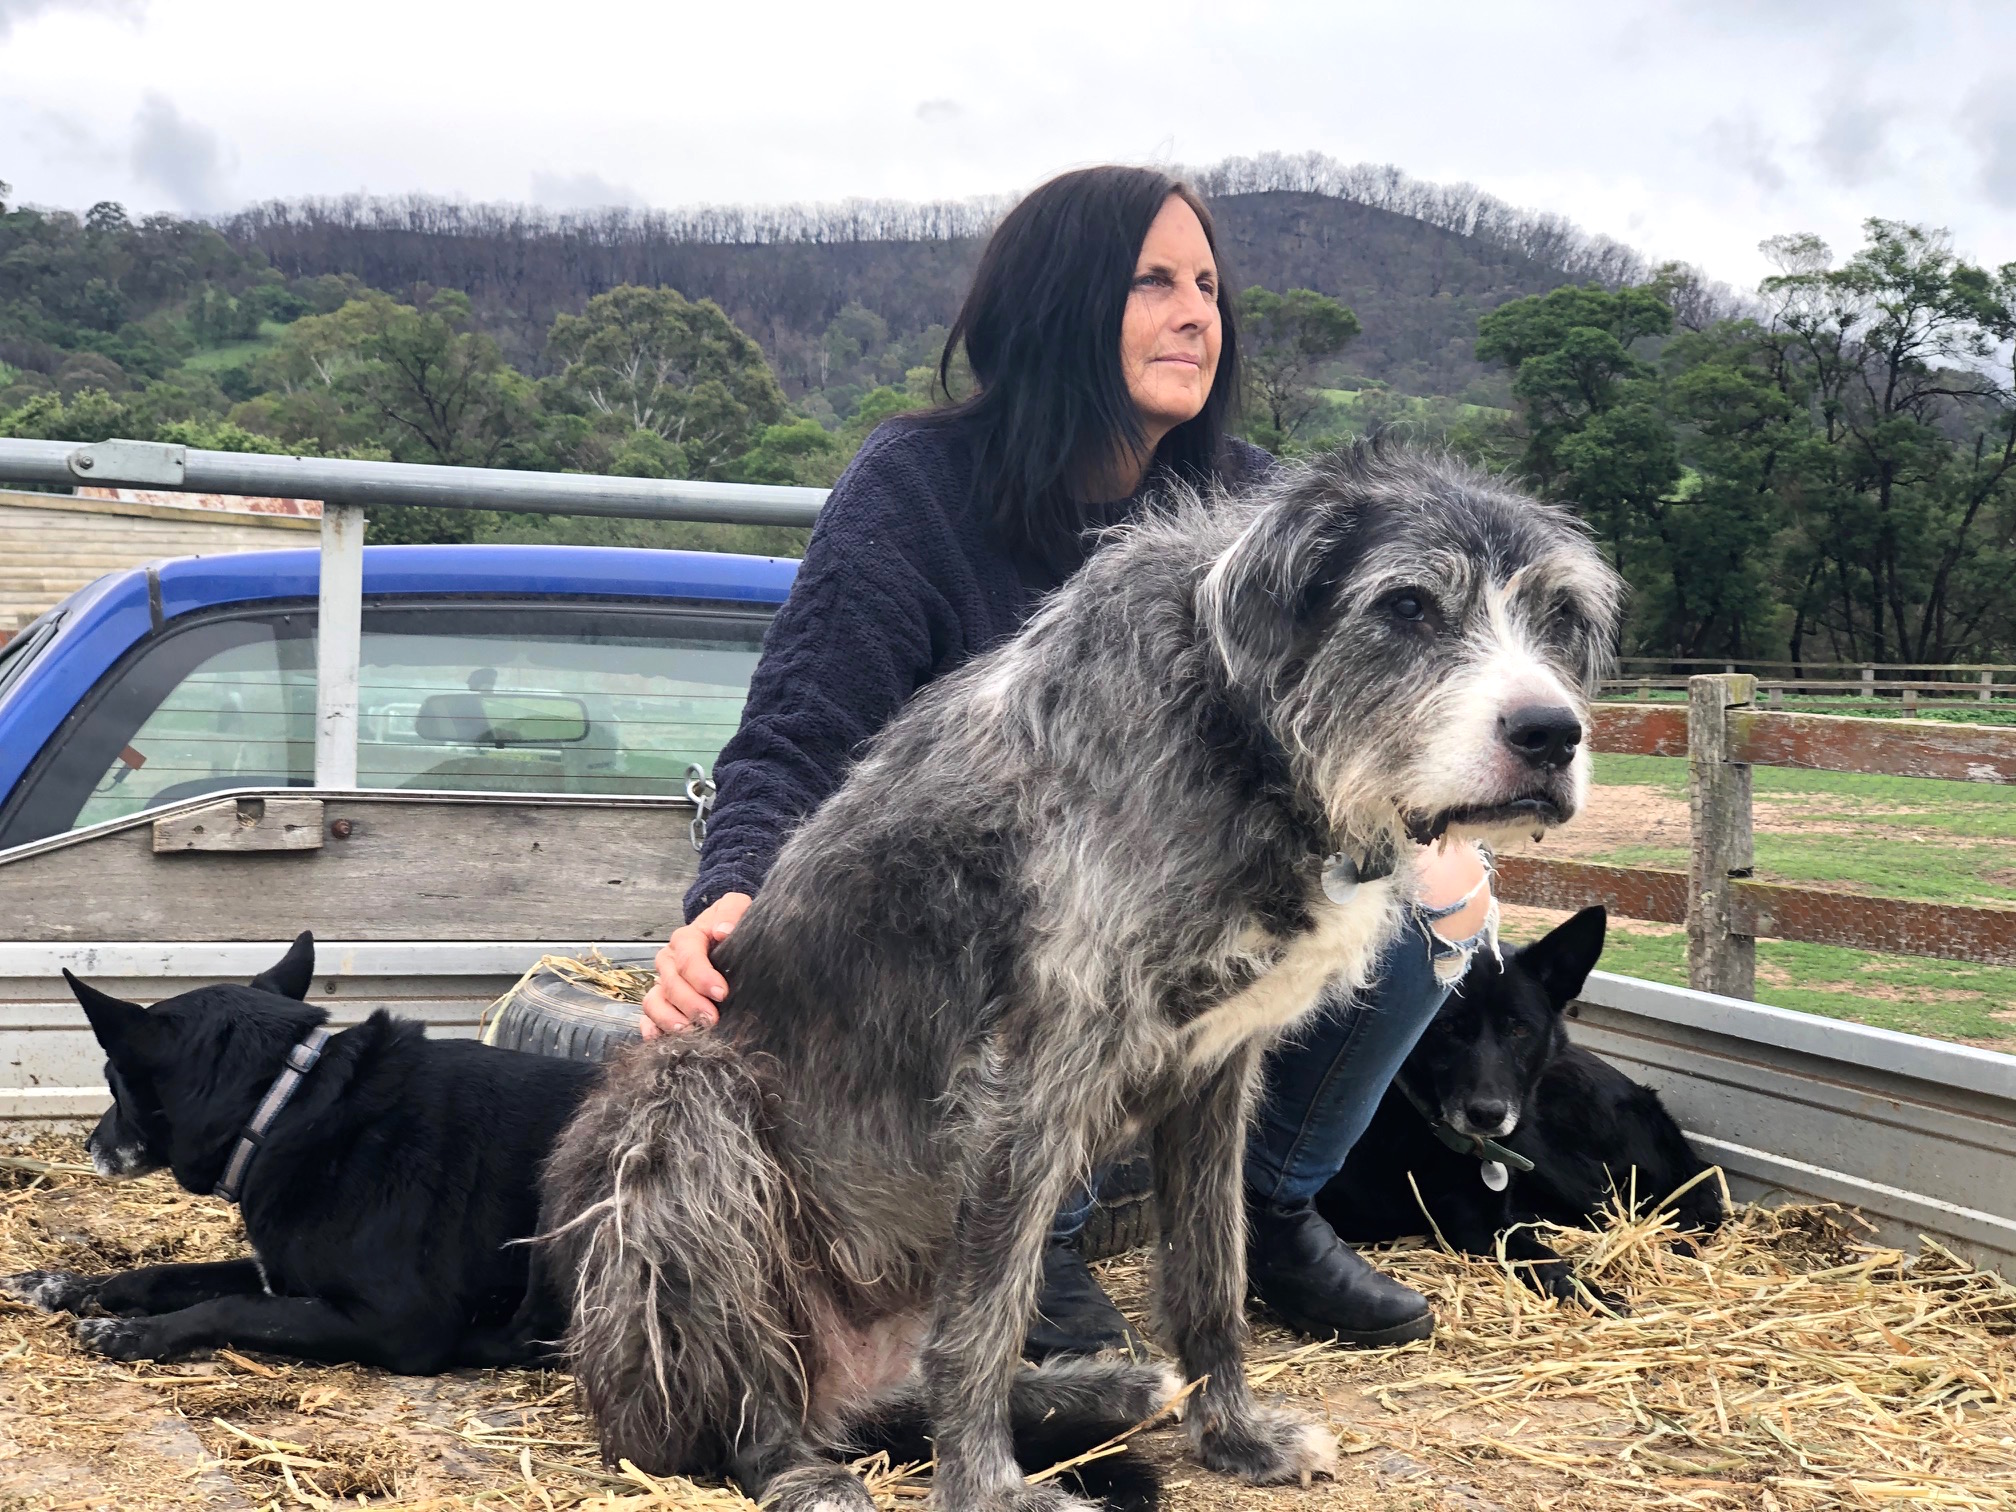 After the fires, 1080 baits pose new problem for animal sanctuary